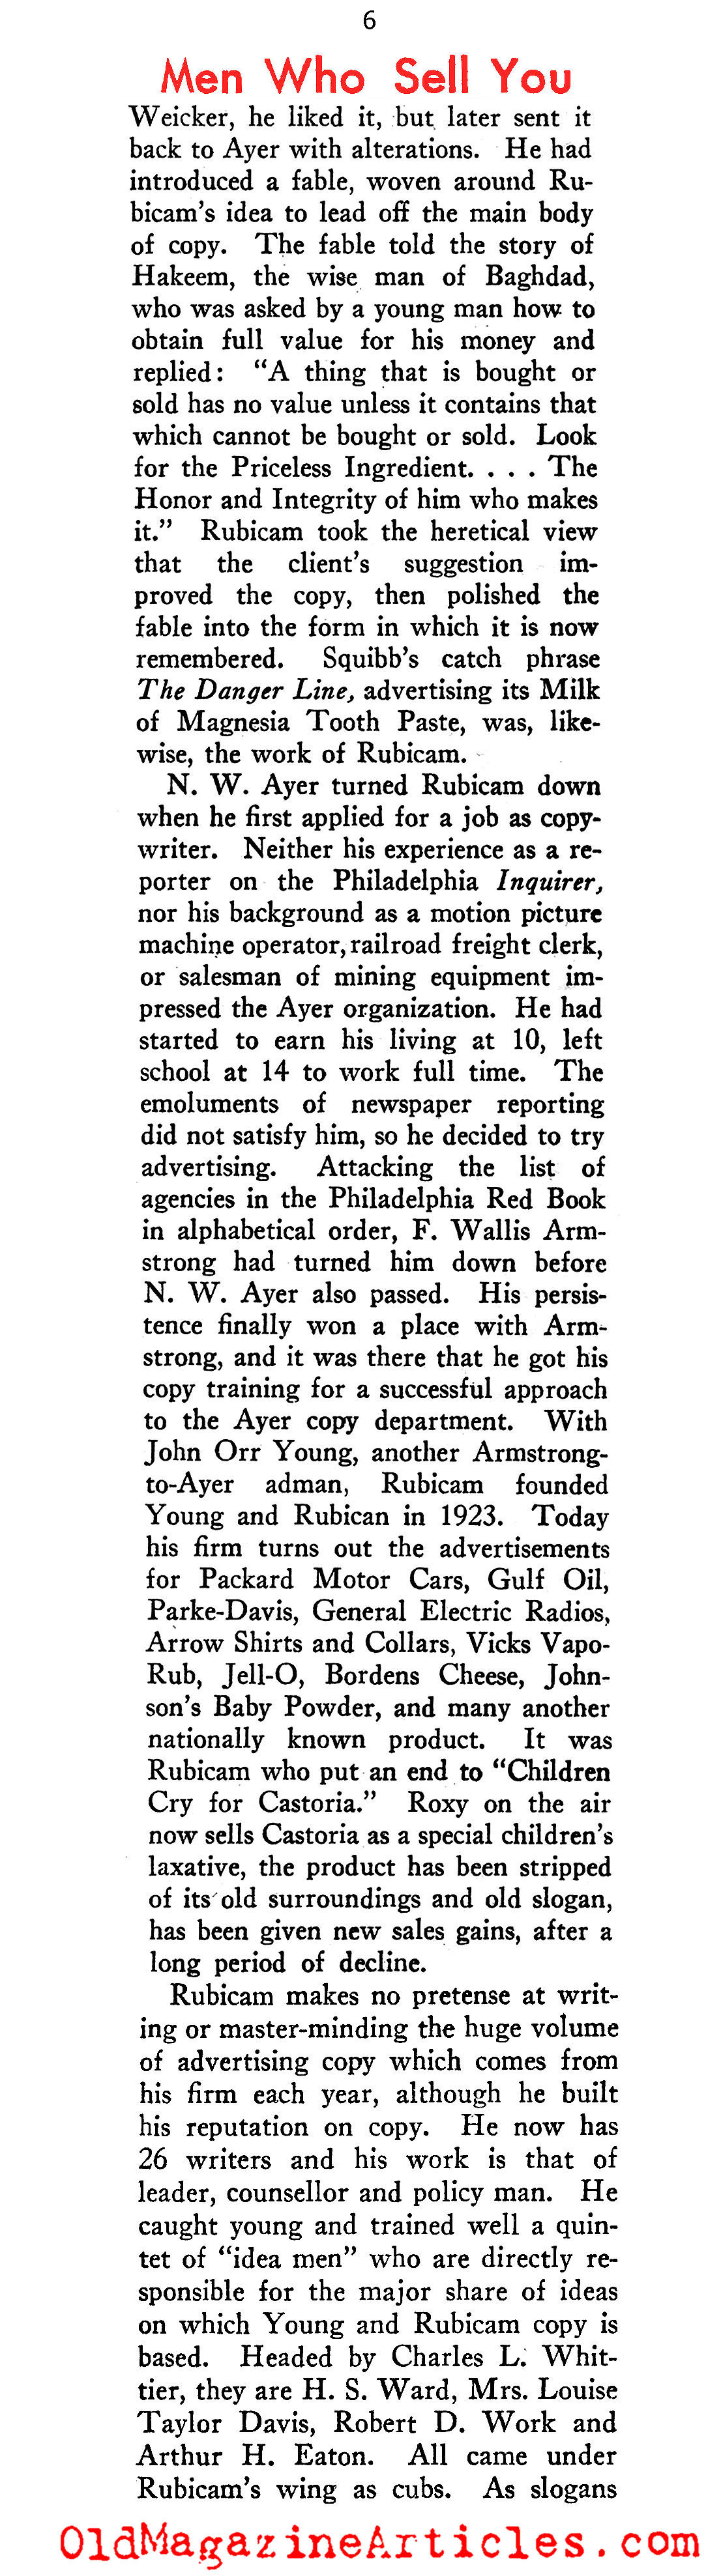 The Fathers of Modern Advertising (New Outlook Magazine, 1934)